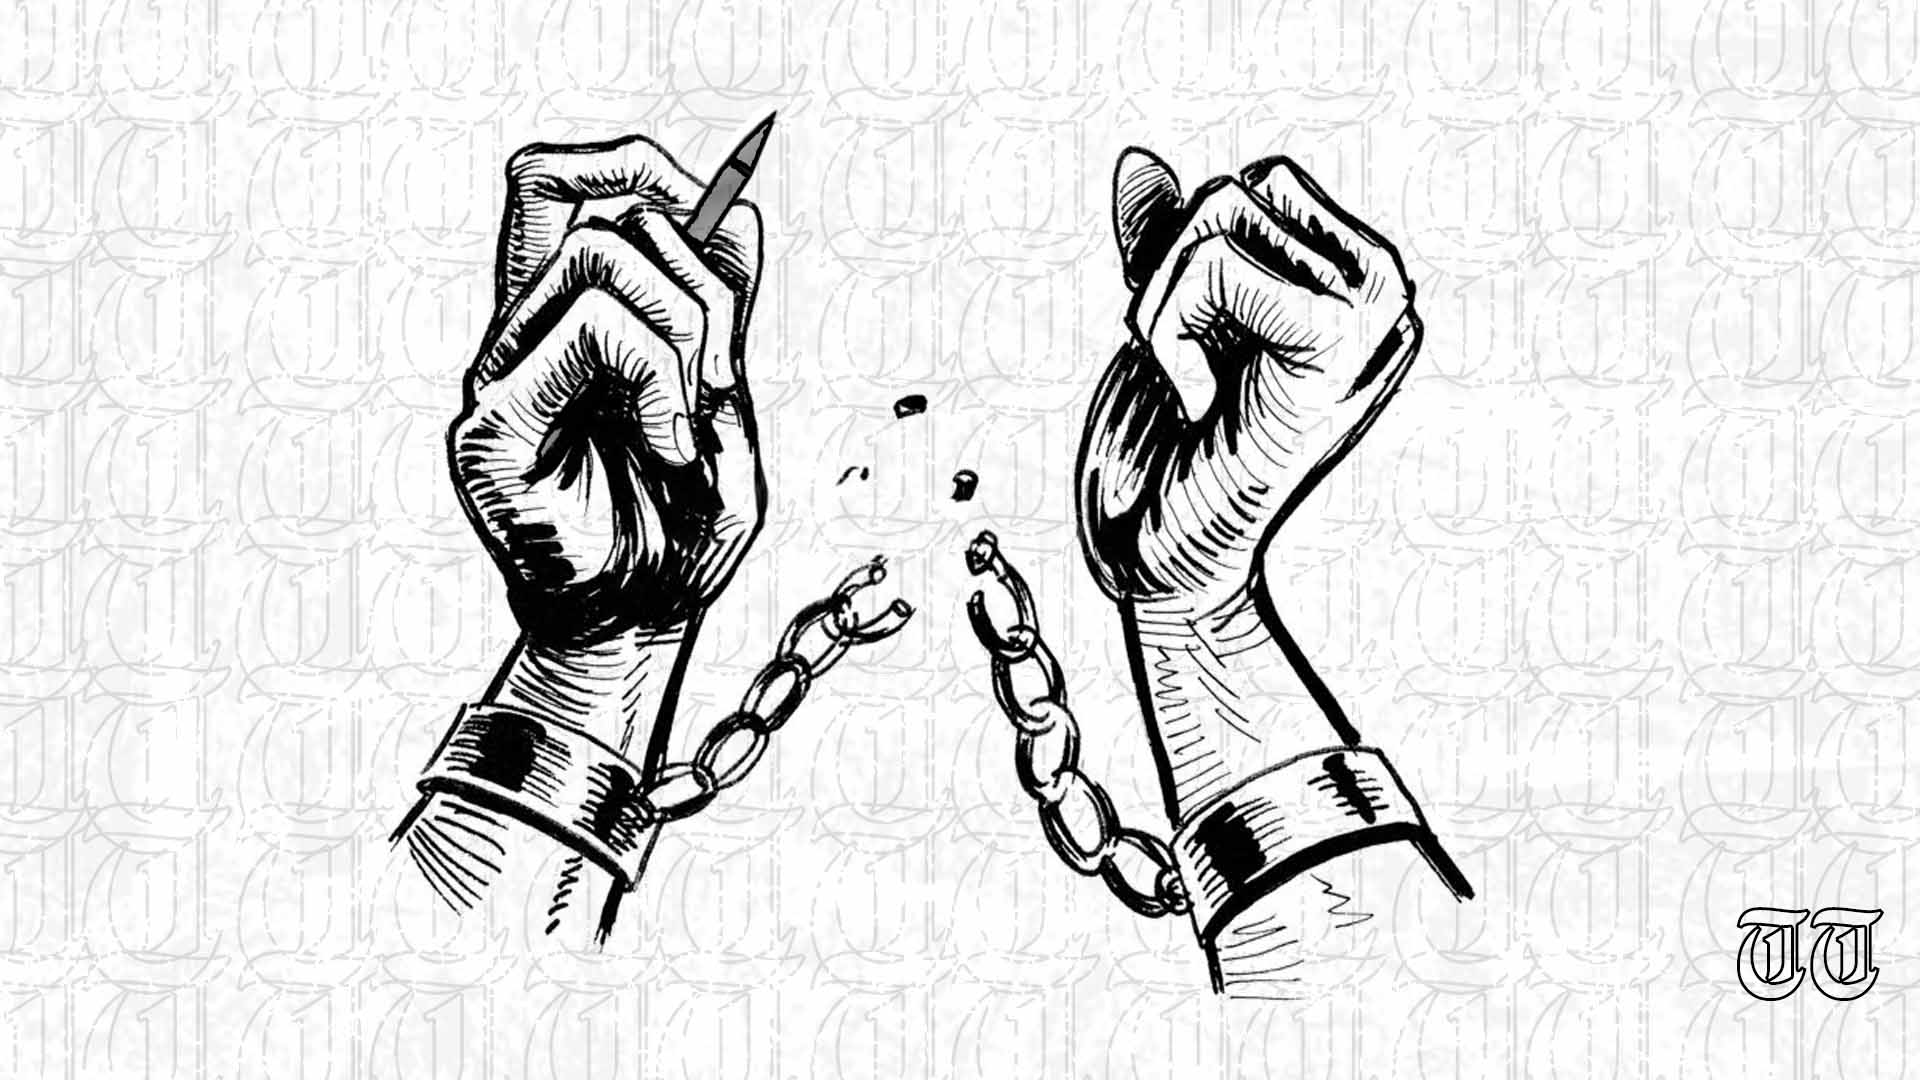 An illustration of a pair of hands breaking free is shown. — FILE/THE THURSDAY TIMES